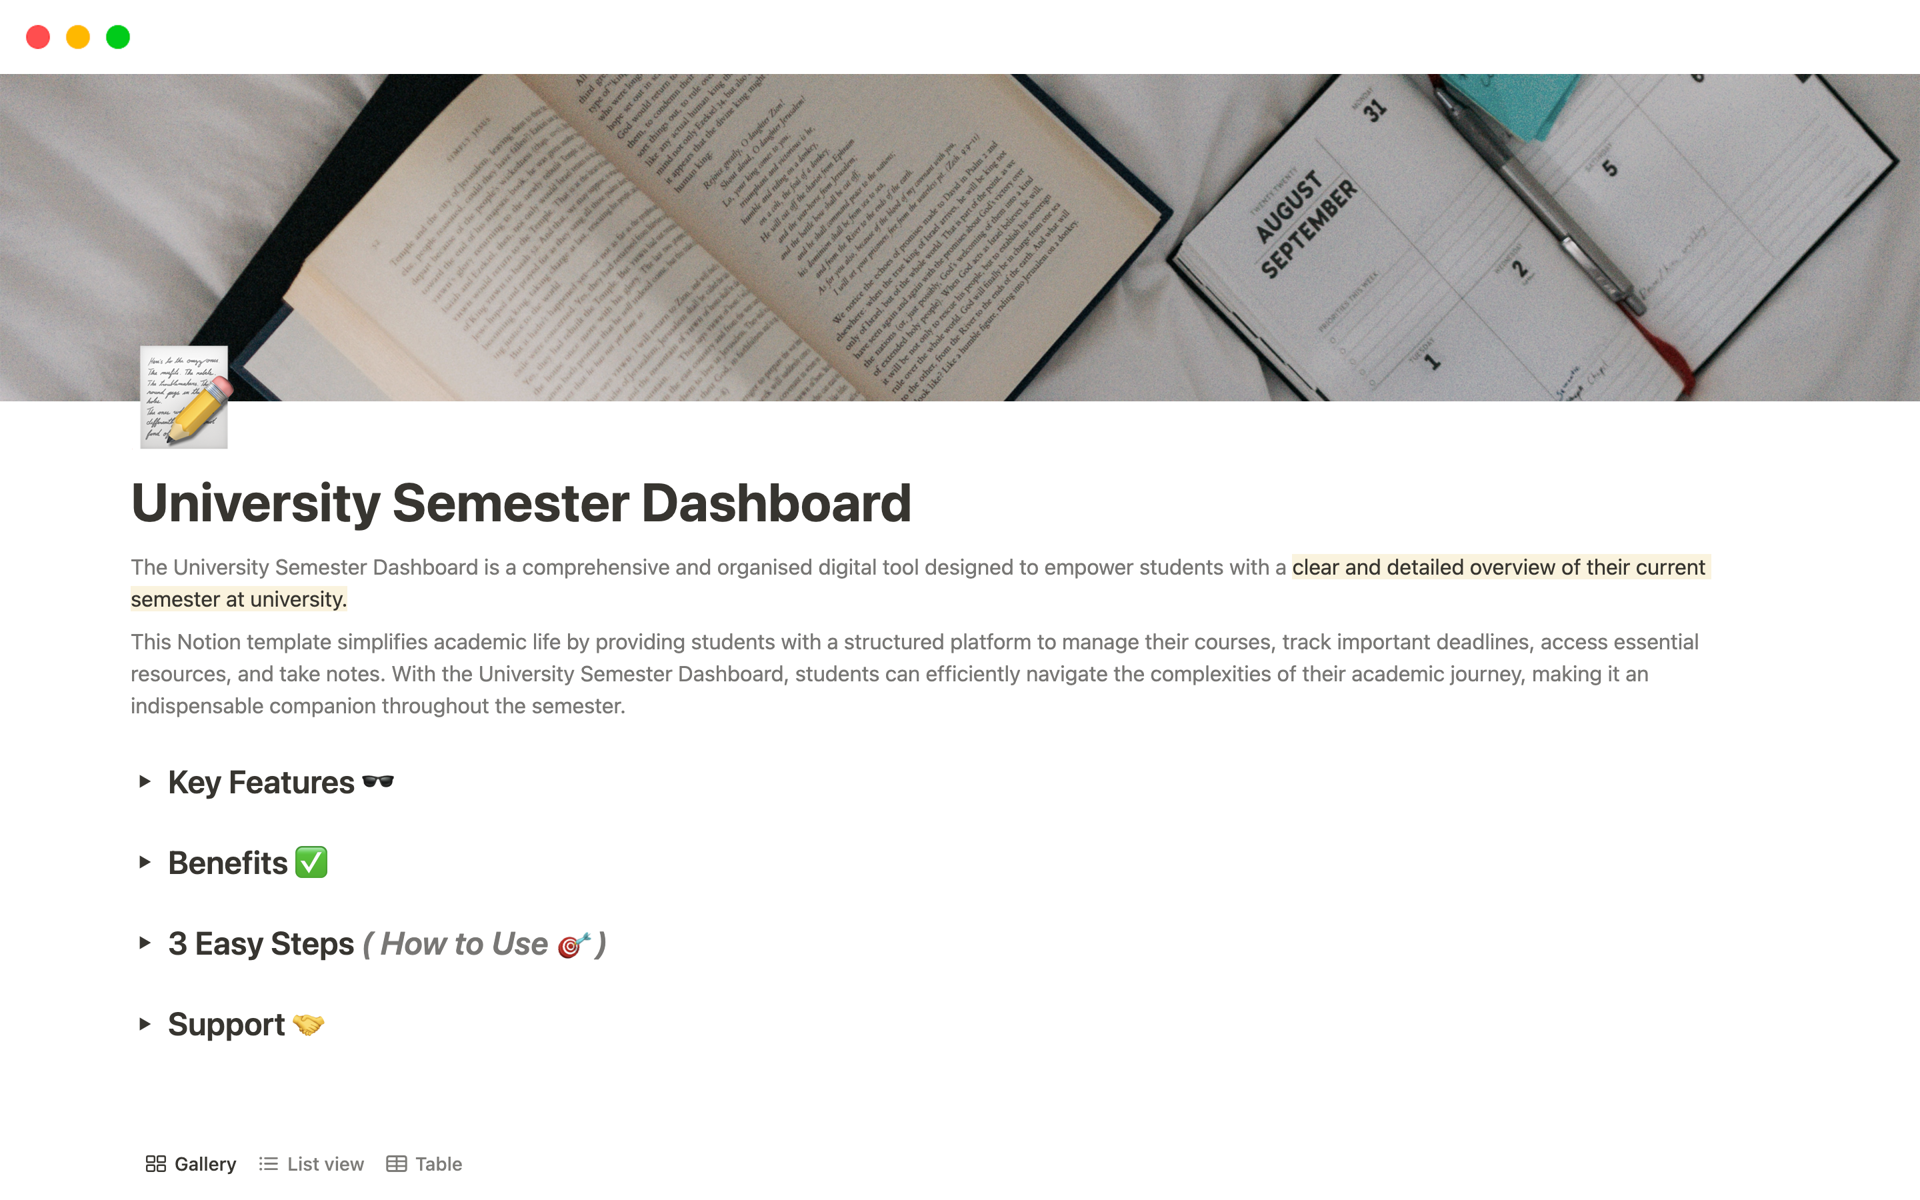 The University Semester Dashboard is a comprehensive and organized digital tool designed to empower students with a clear and detailed overview of their current semester at university.